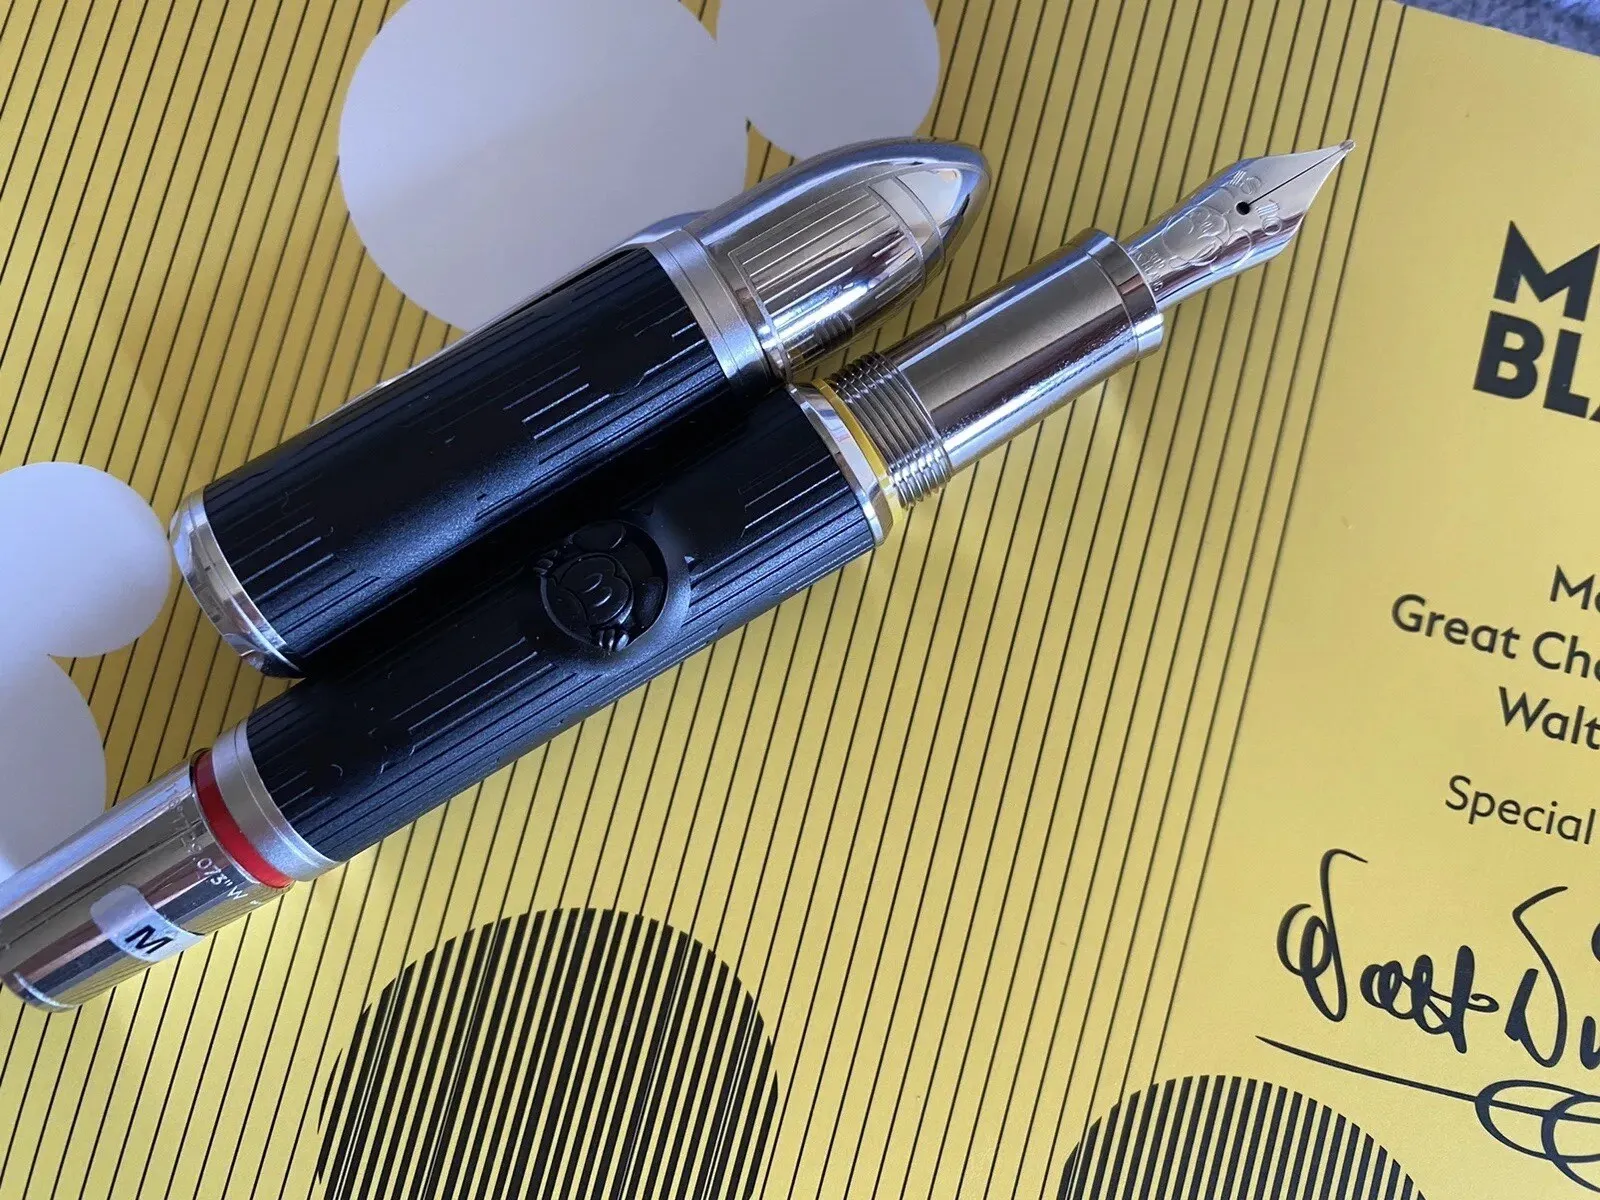 Pens and Pencils: : Mont Blanc: Special Edition